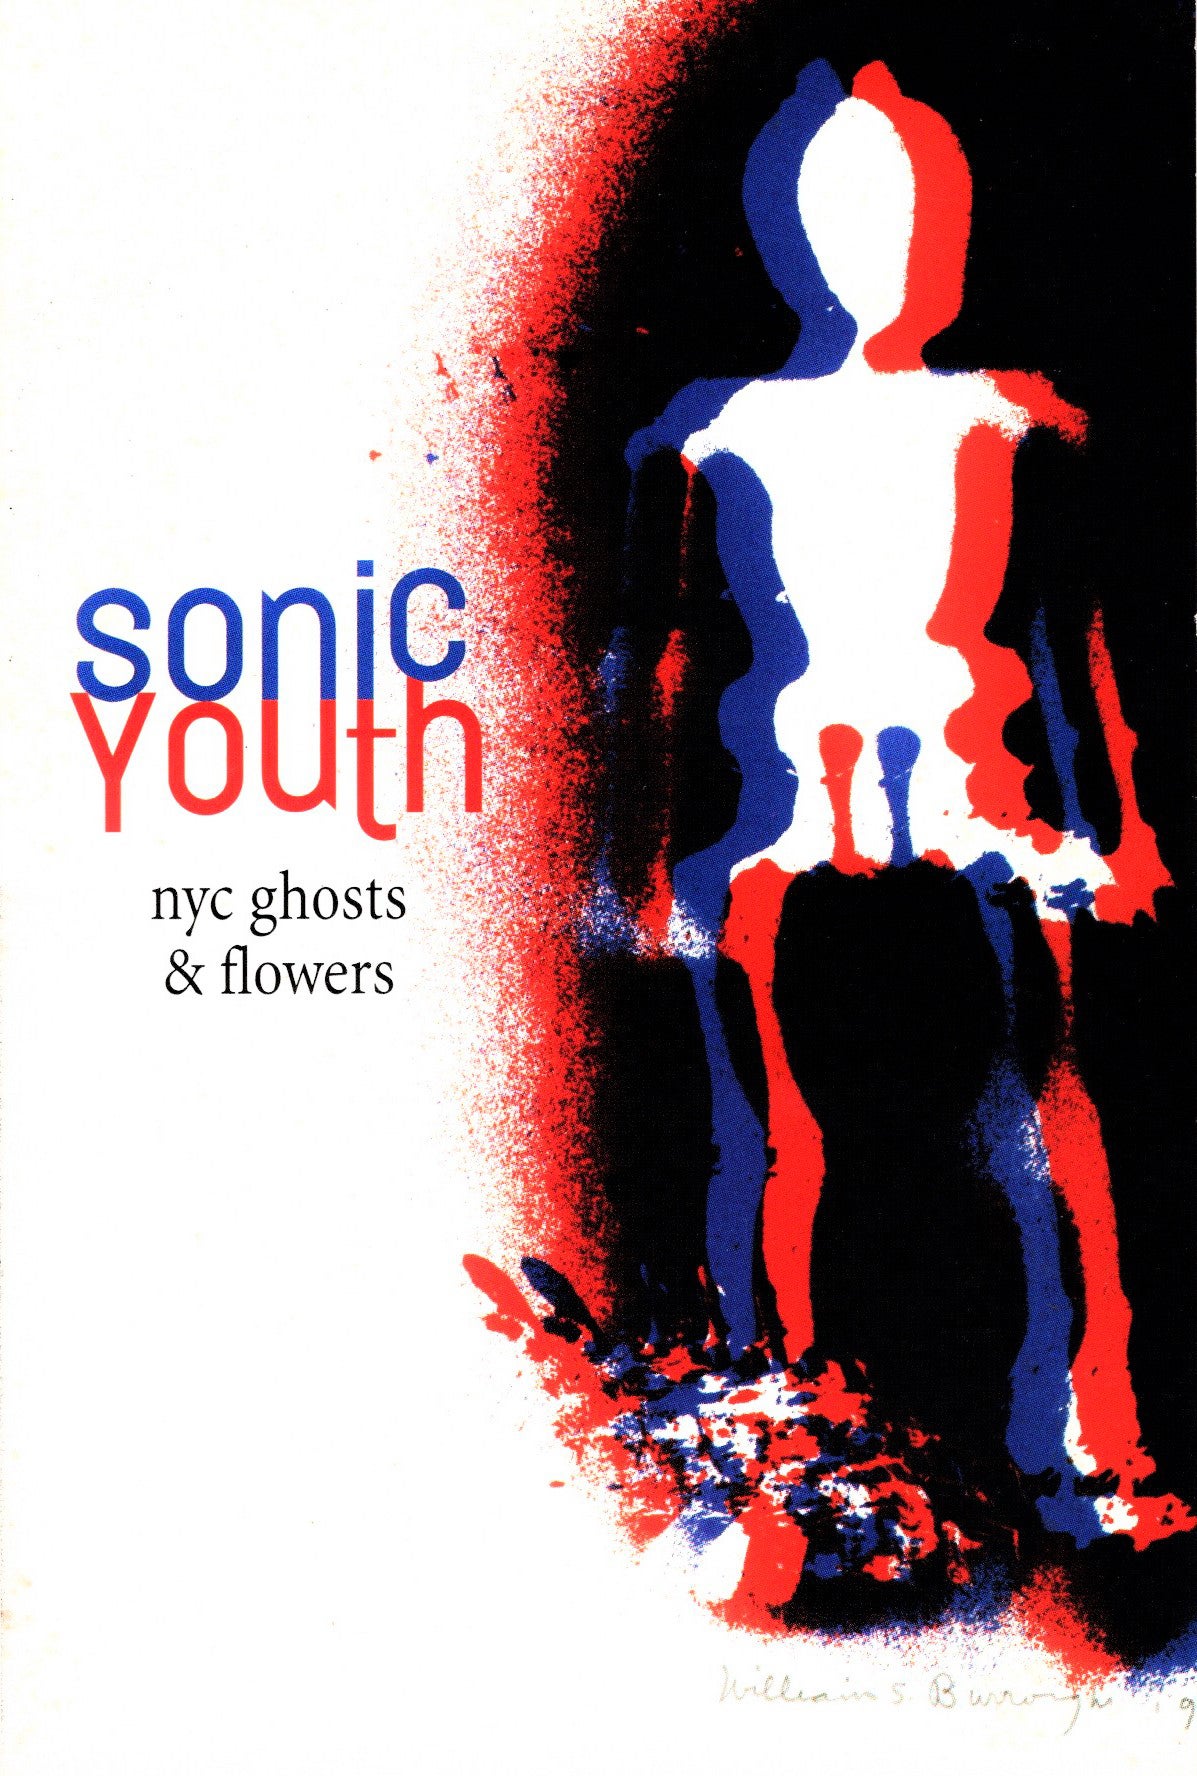 Sonic Youth Ghosts & Flowers LP Record with: Postcard by William S.  Burroughs, Thurston Moore on Third Mind Books